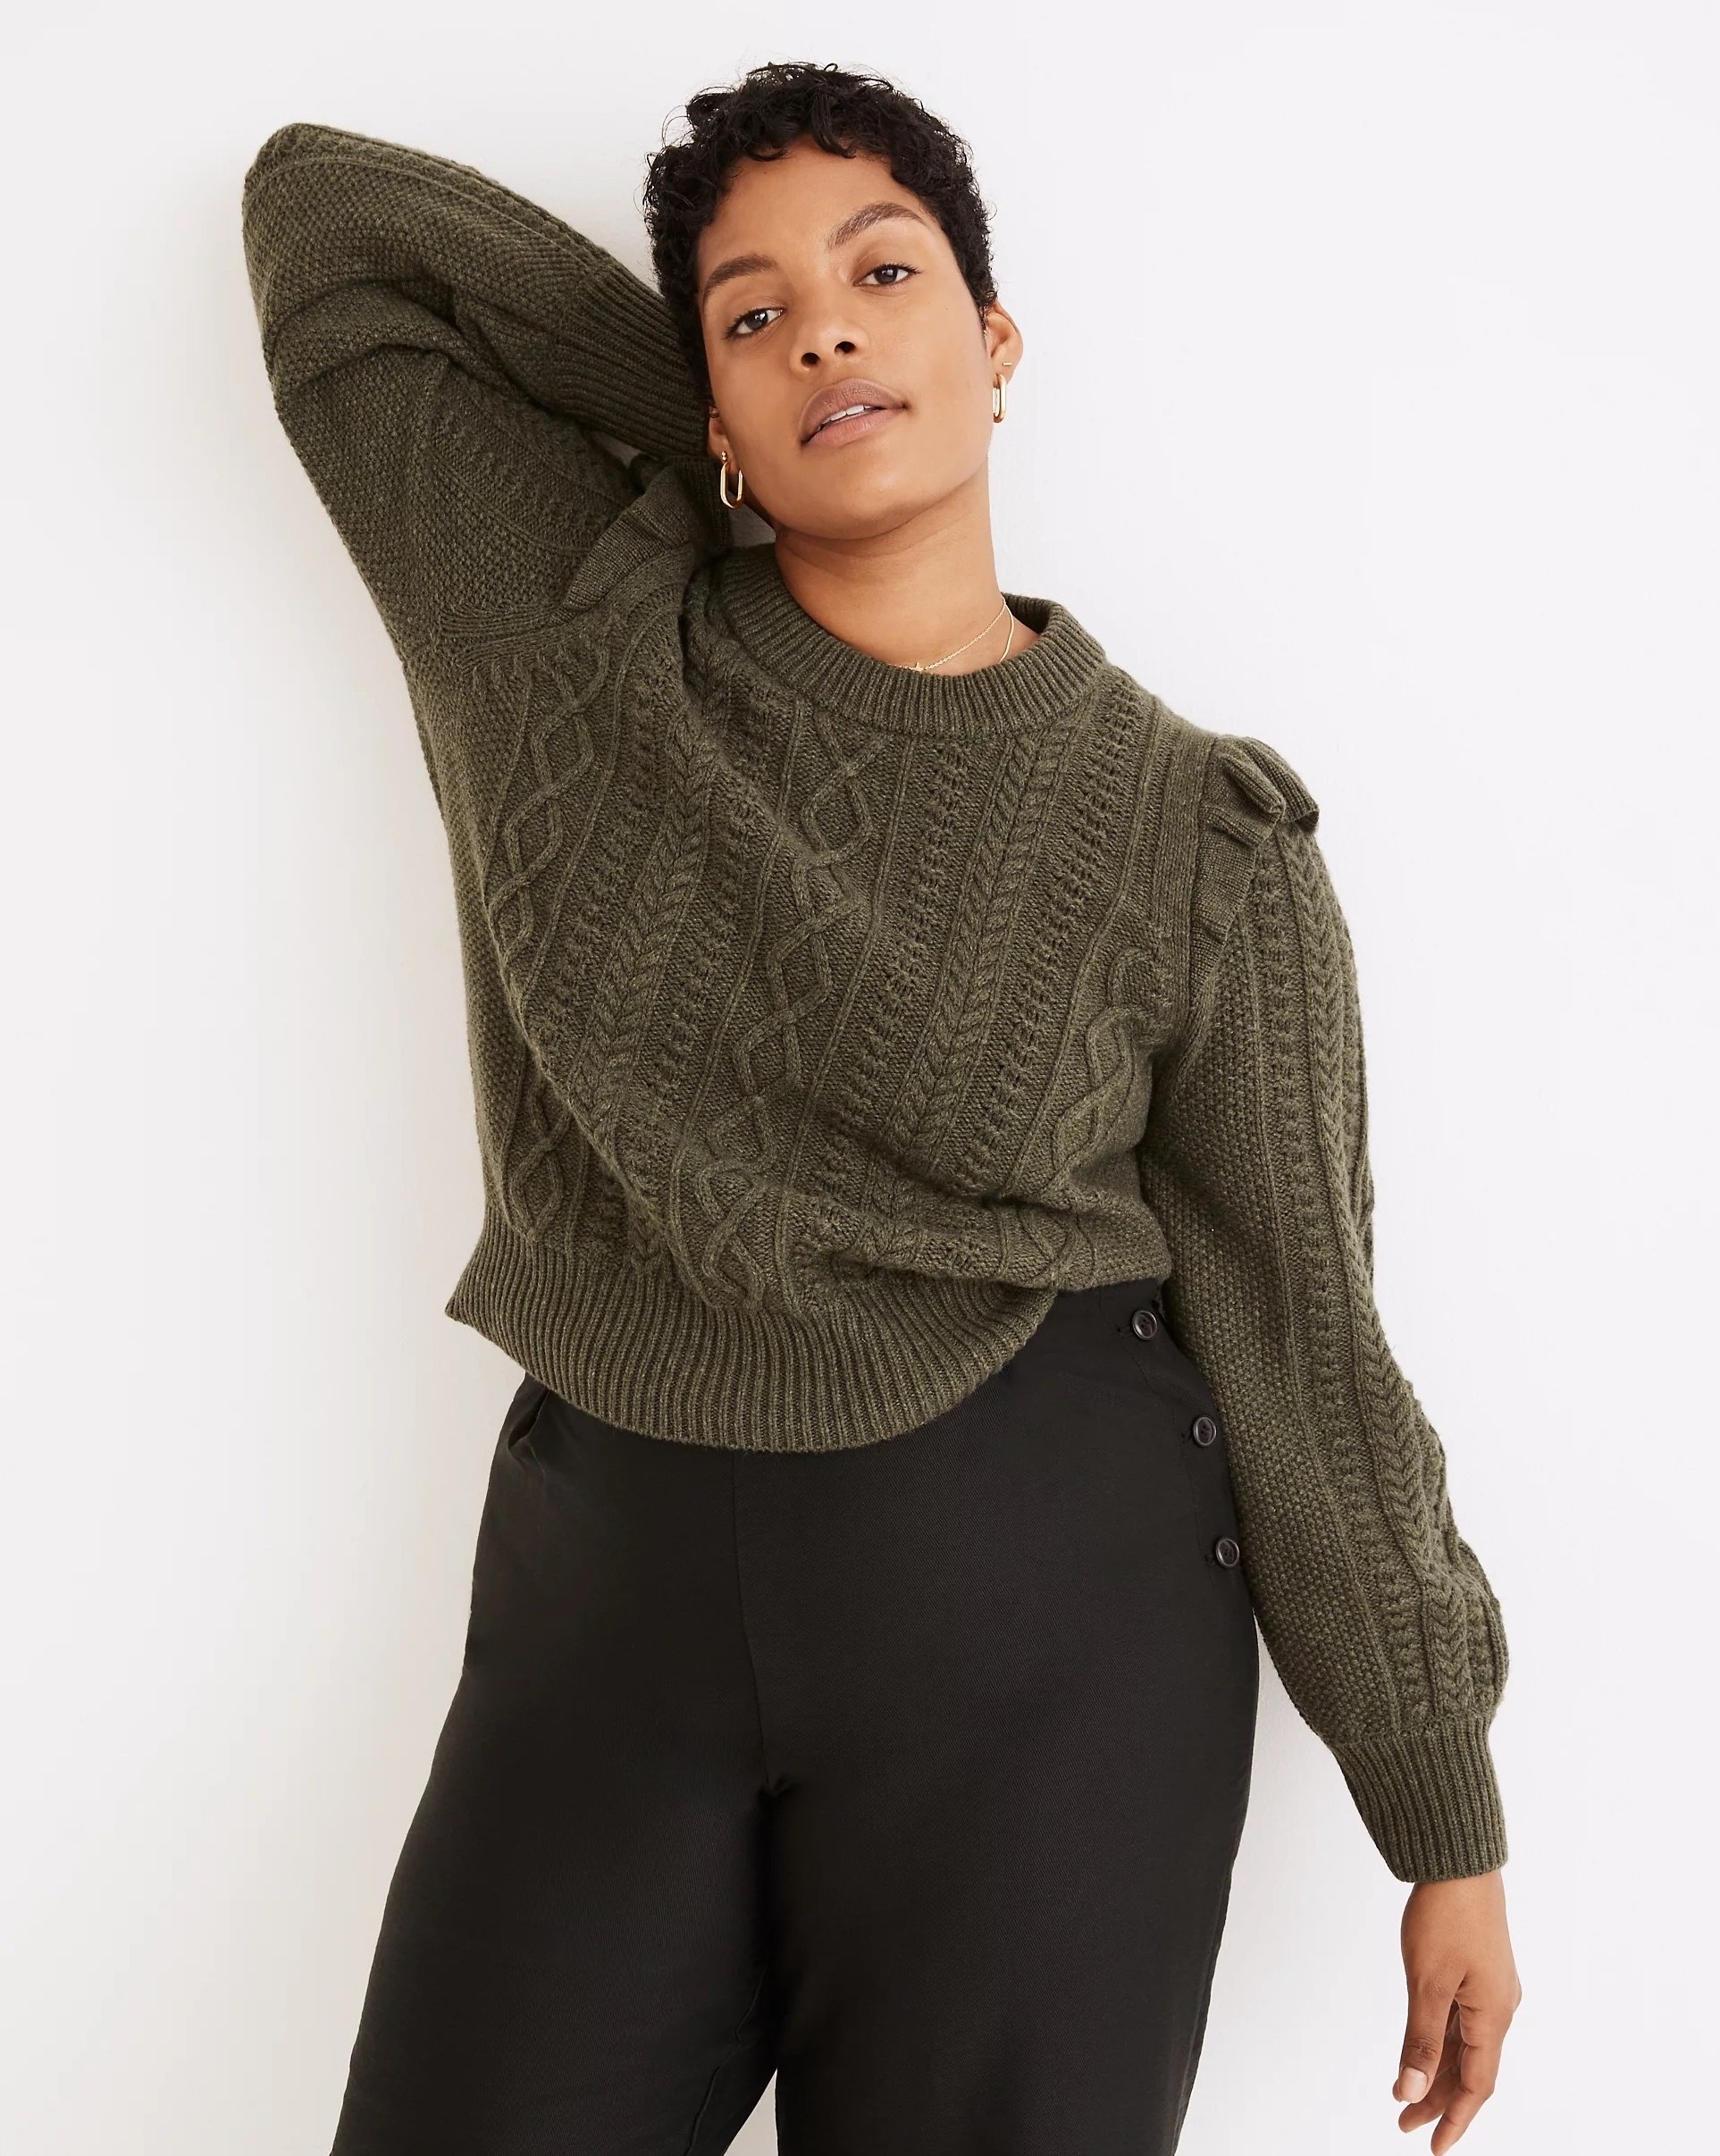 Model wearing green sweater with black pants